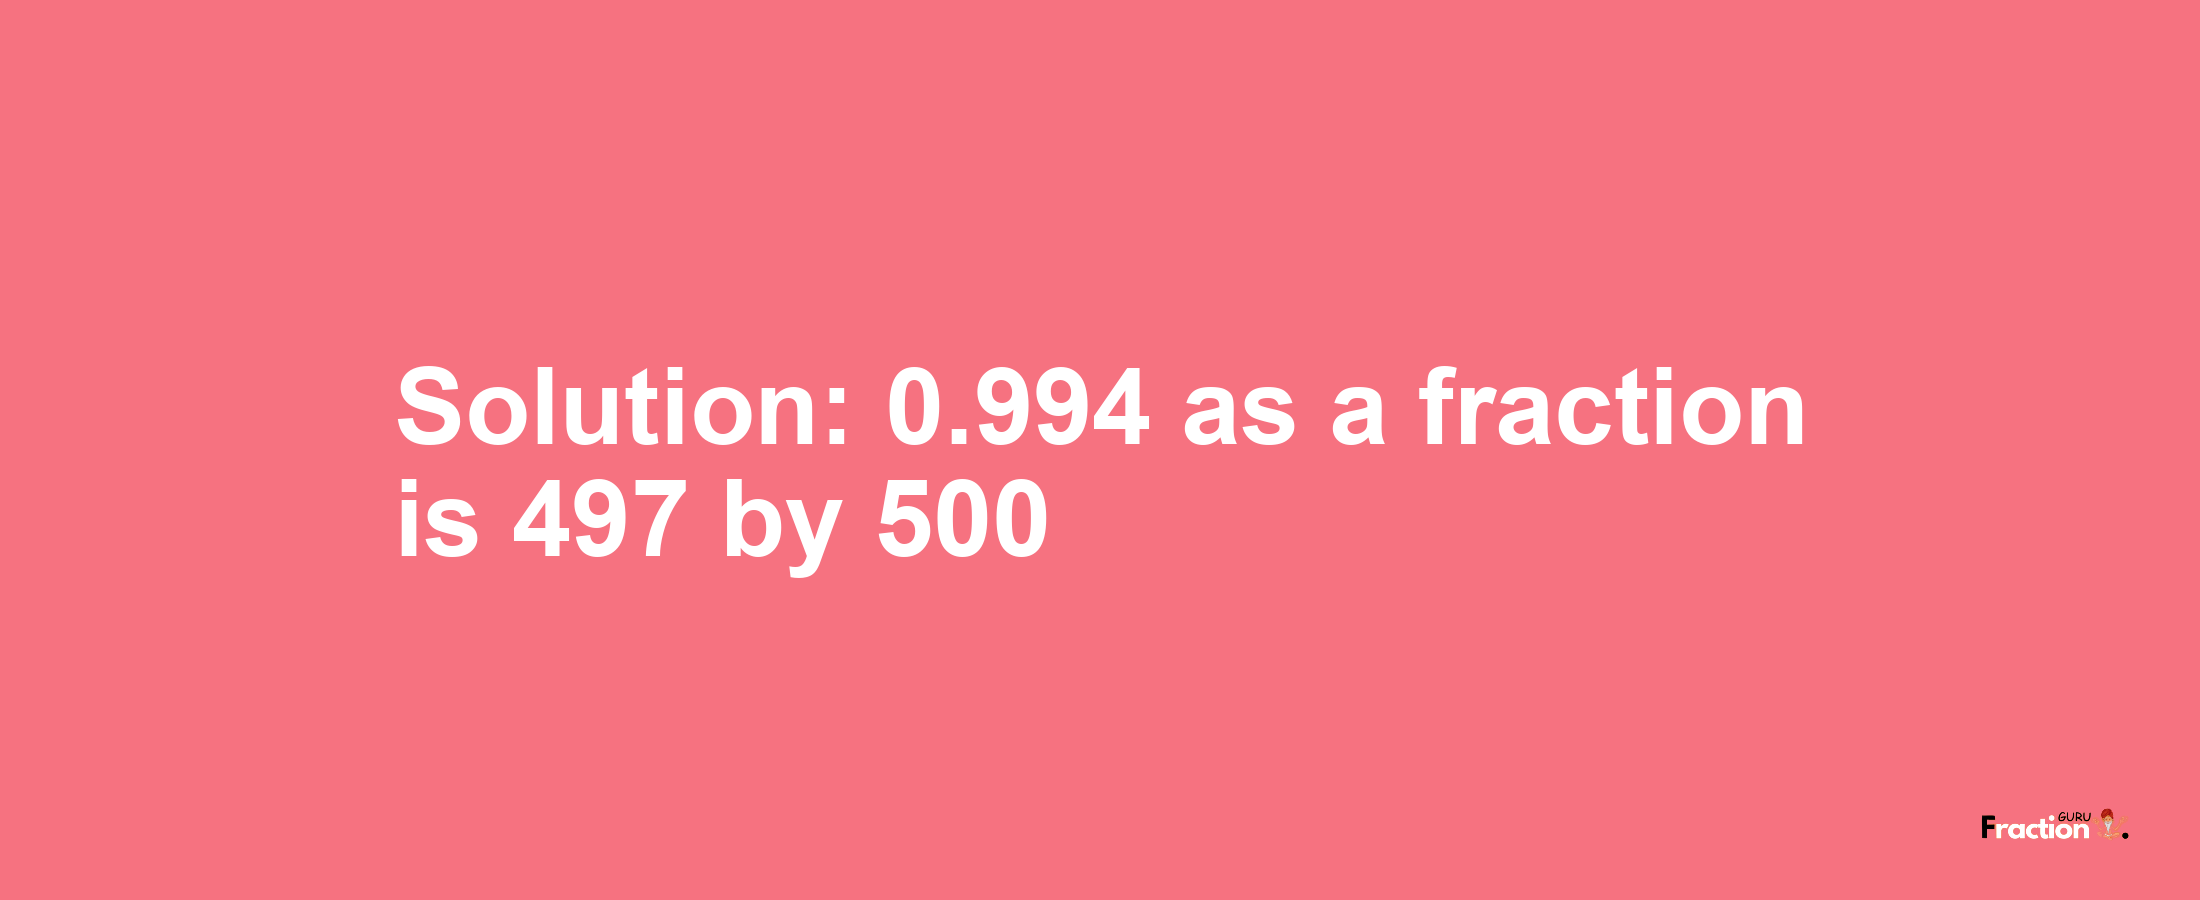 Solution:0.994 as a fraction is 497/500